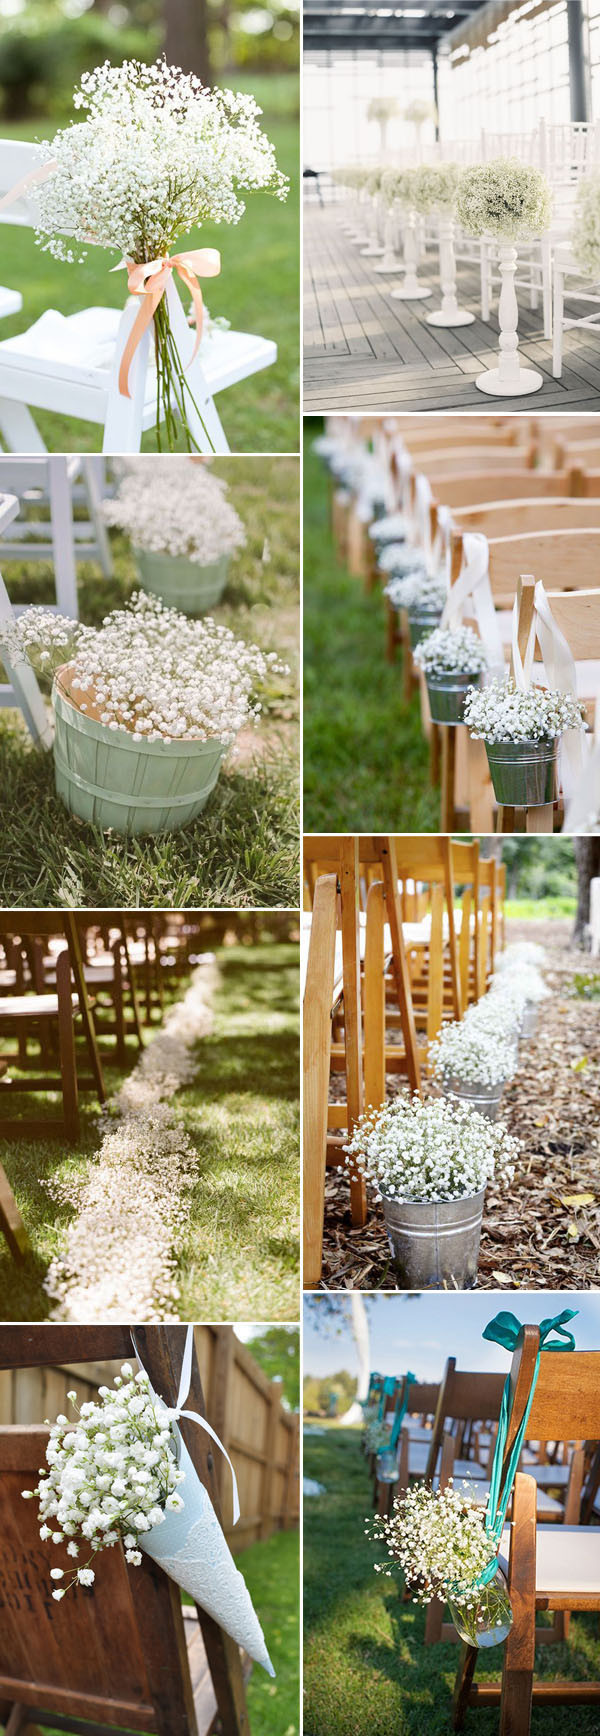 DIY Wedding Aisle Decorations
 Save Your Bud on Weddings with 45 Baby’s Breath Ideas